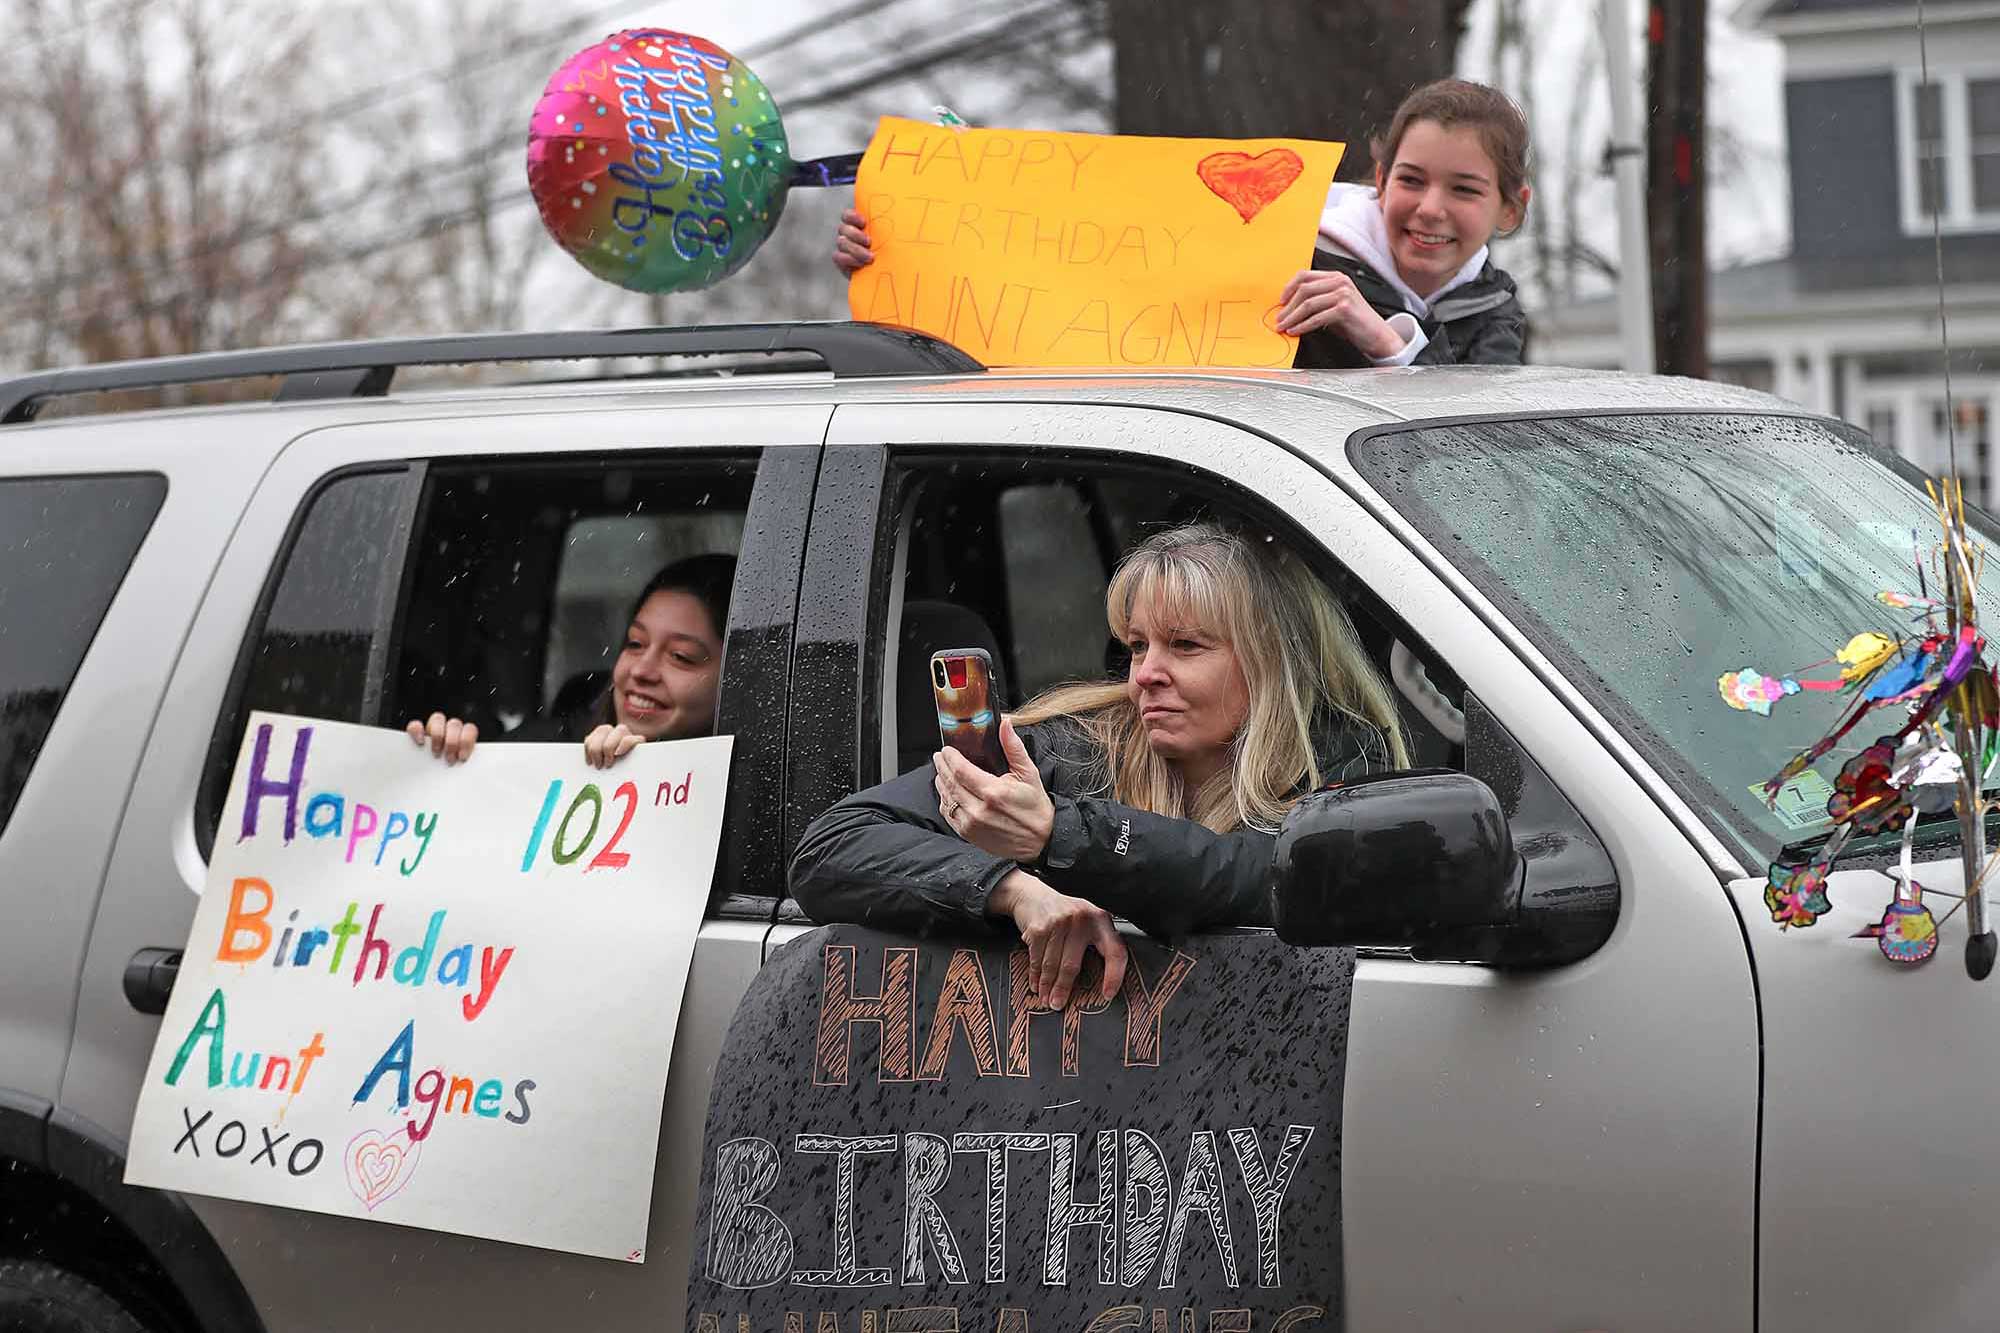  Three people hold colorful birthday signs outside of a car window.